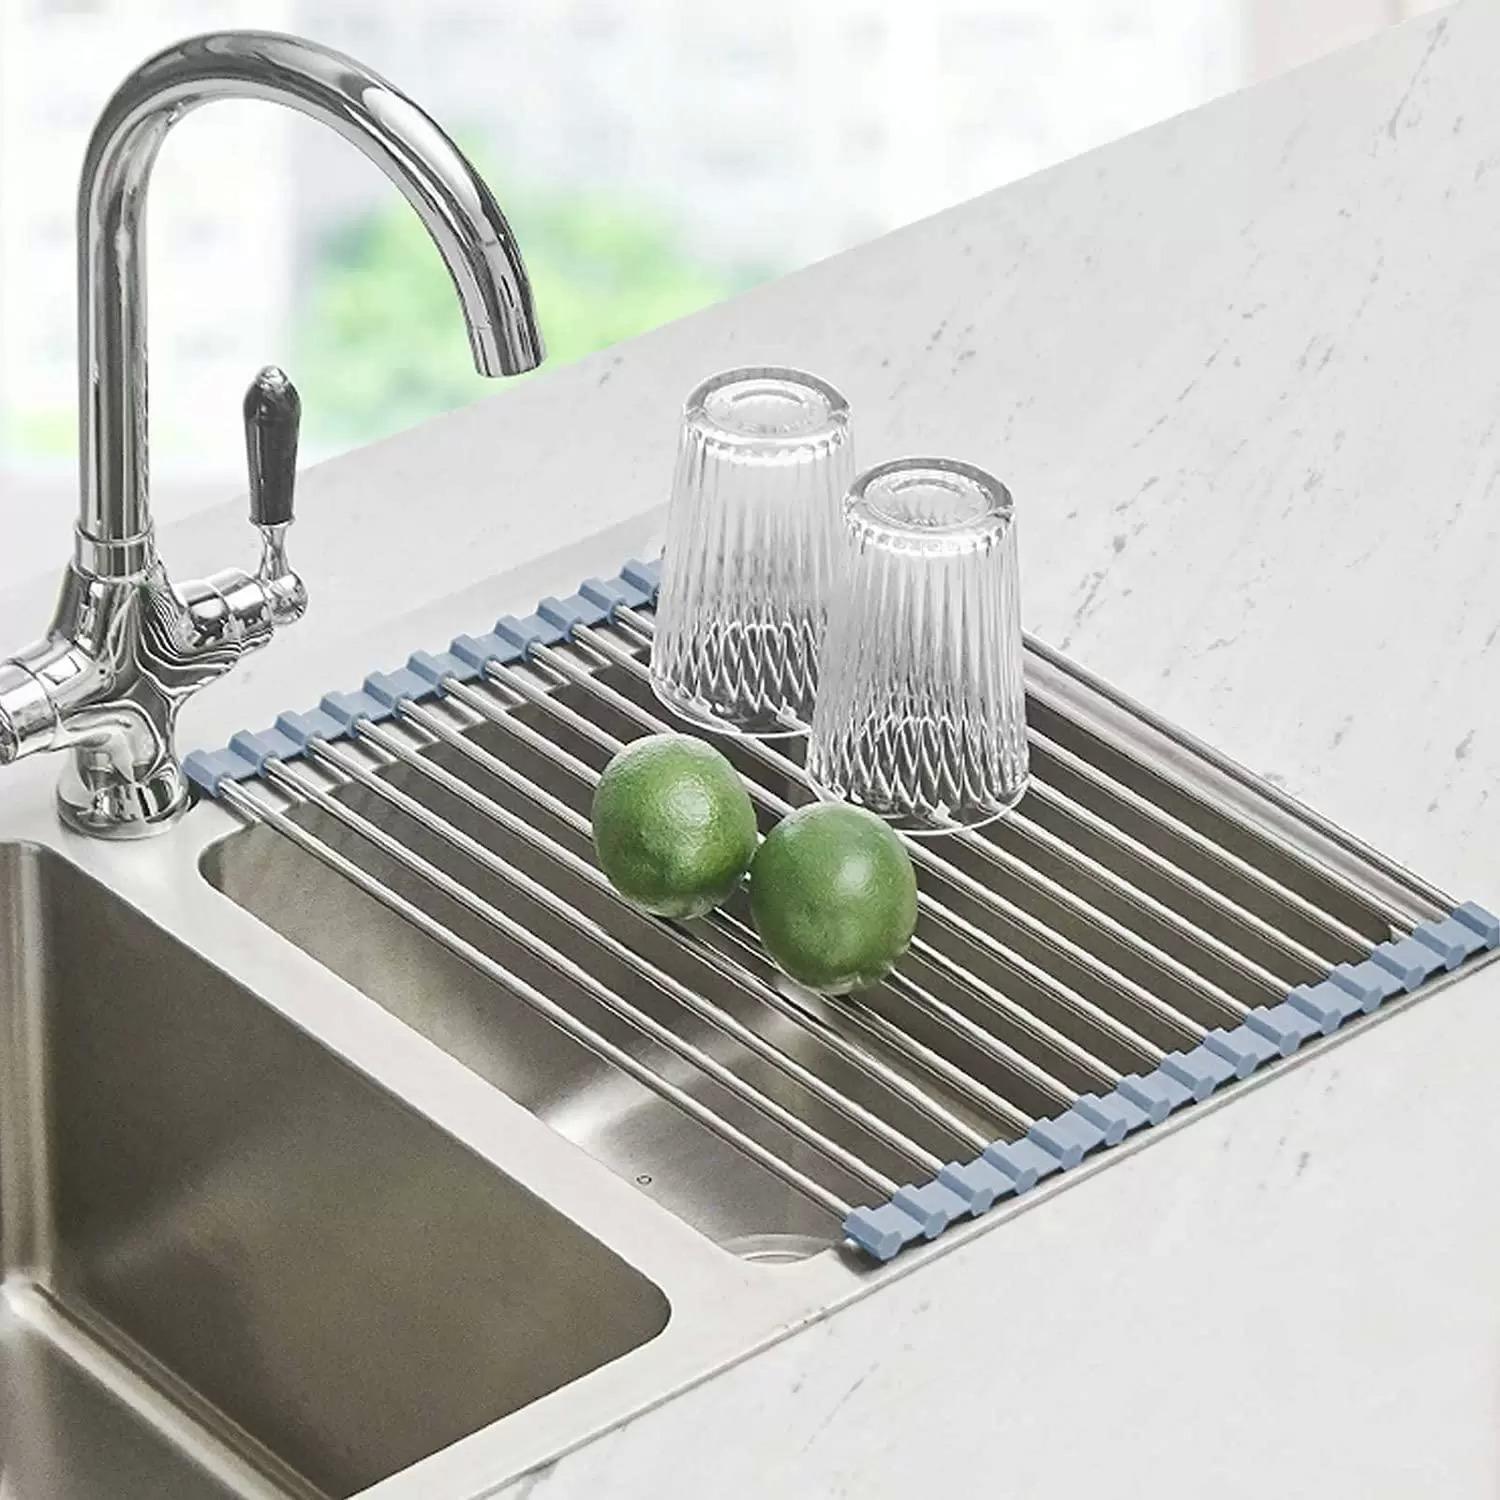 Seropy-Over-The Sink Roll Up Dish Drying Rack for $6.82